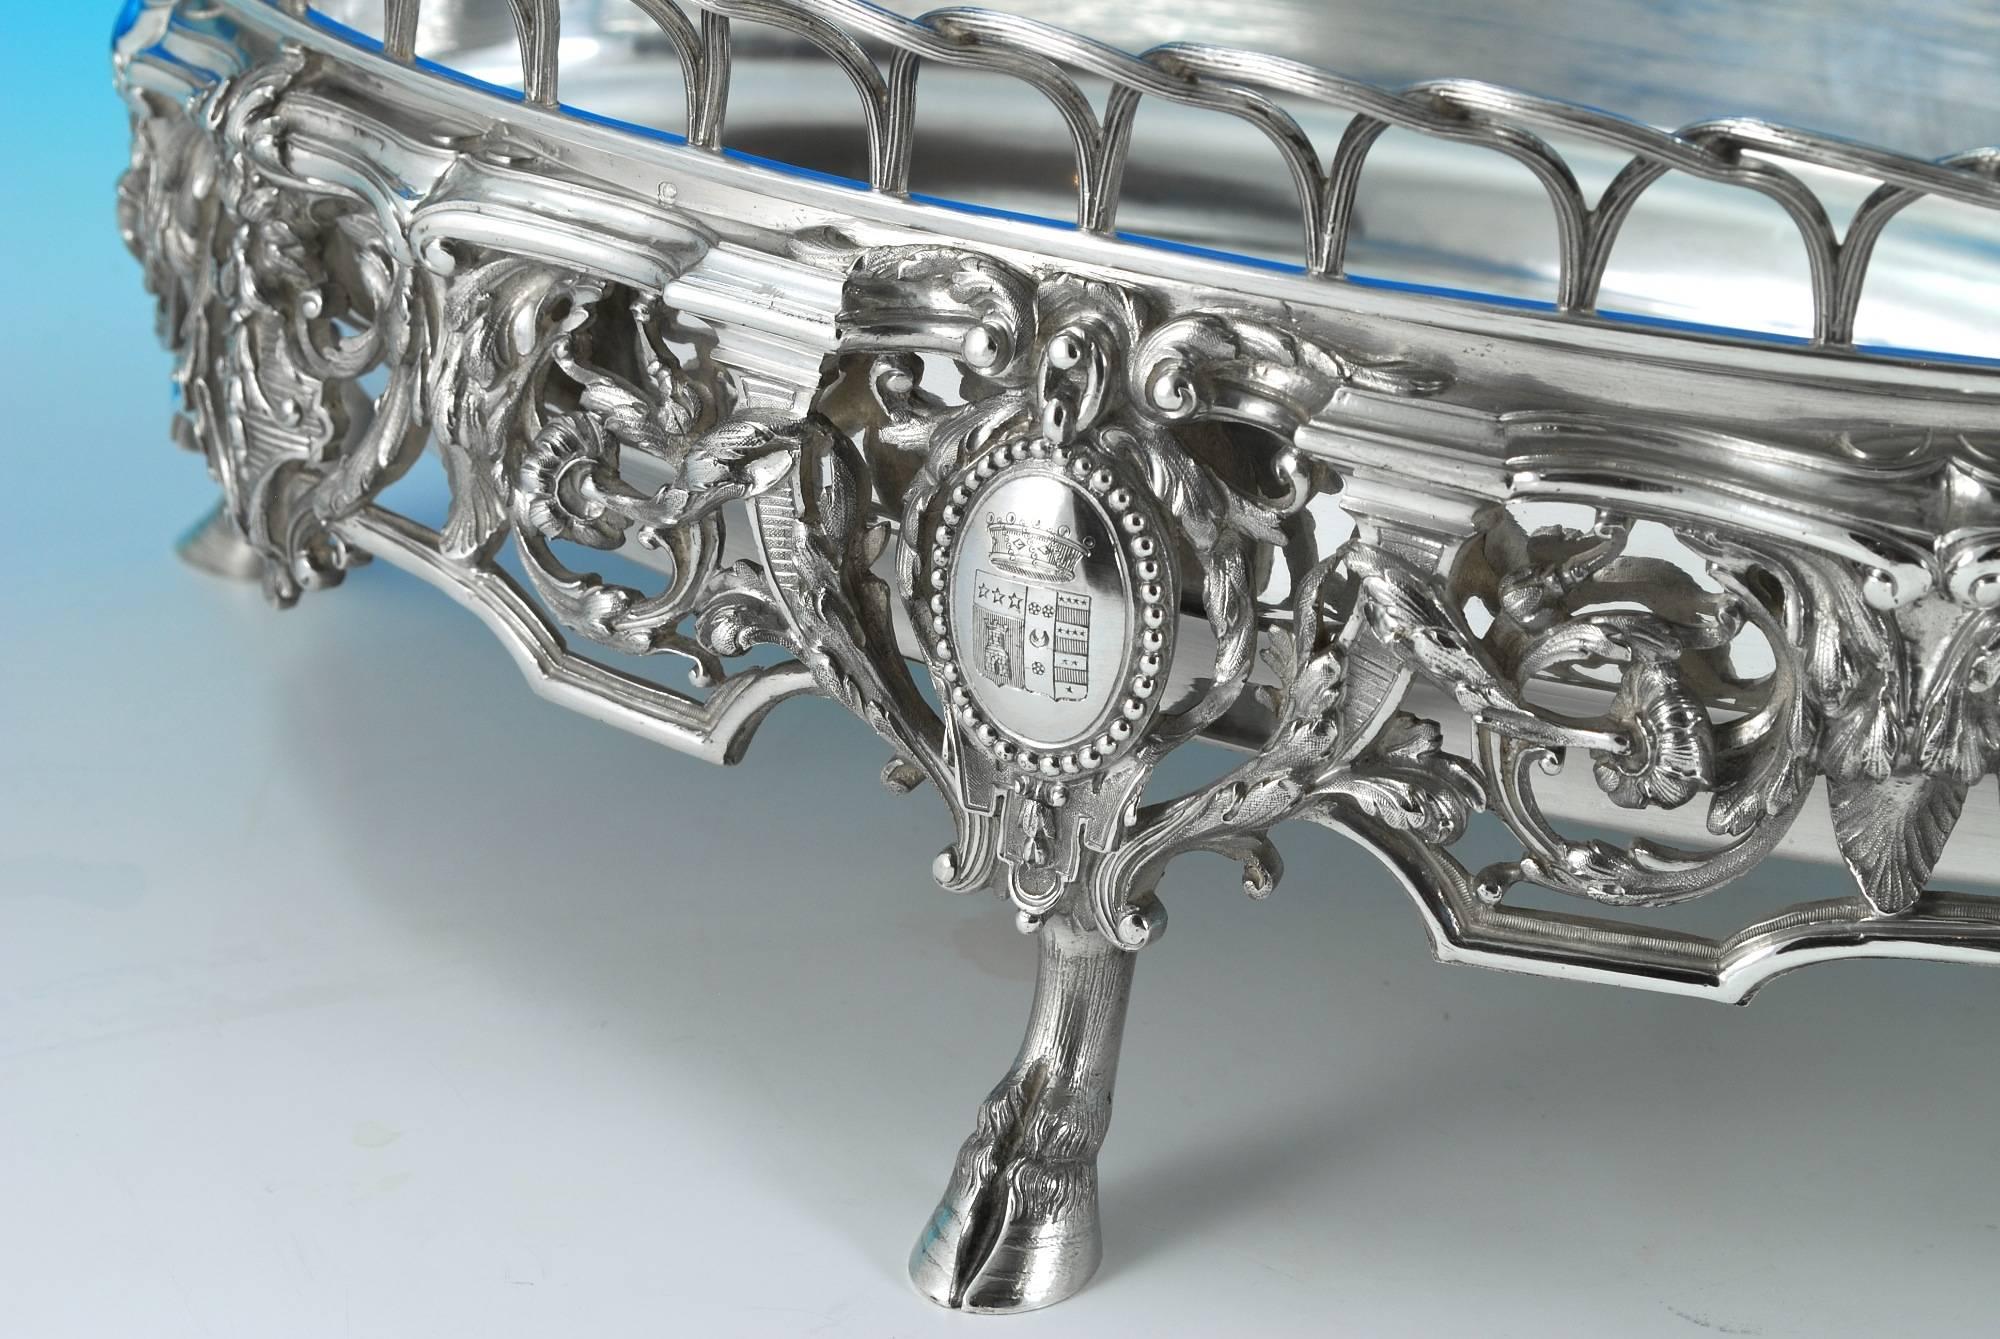 Silver jardiniere by Sollier, Paris, circa 1890.

Measures: 17 1/2 inches (44cm) long,
11 1/2 inches (29cm) wide,
6 inches (15cm) high

Weight 97oz (3020g).